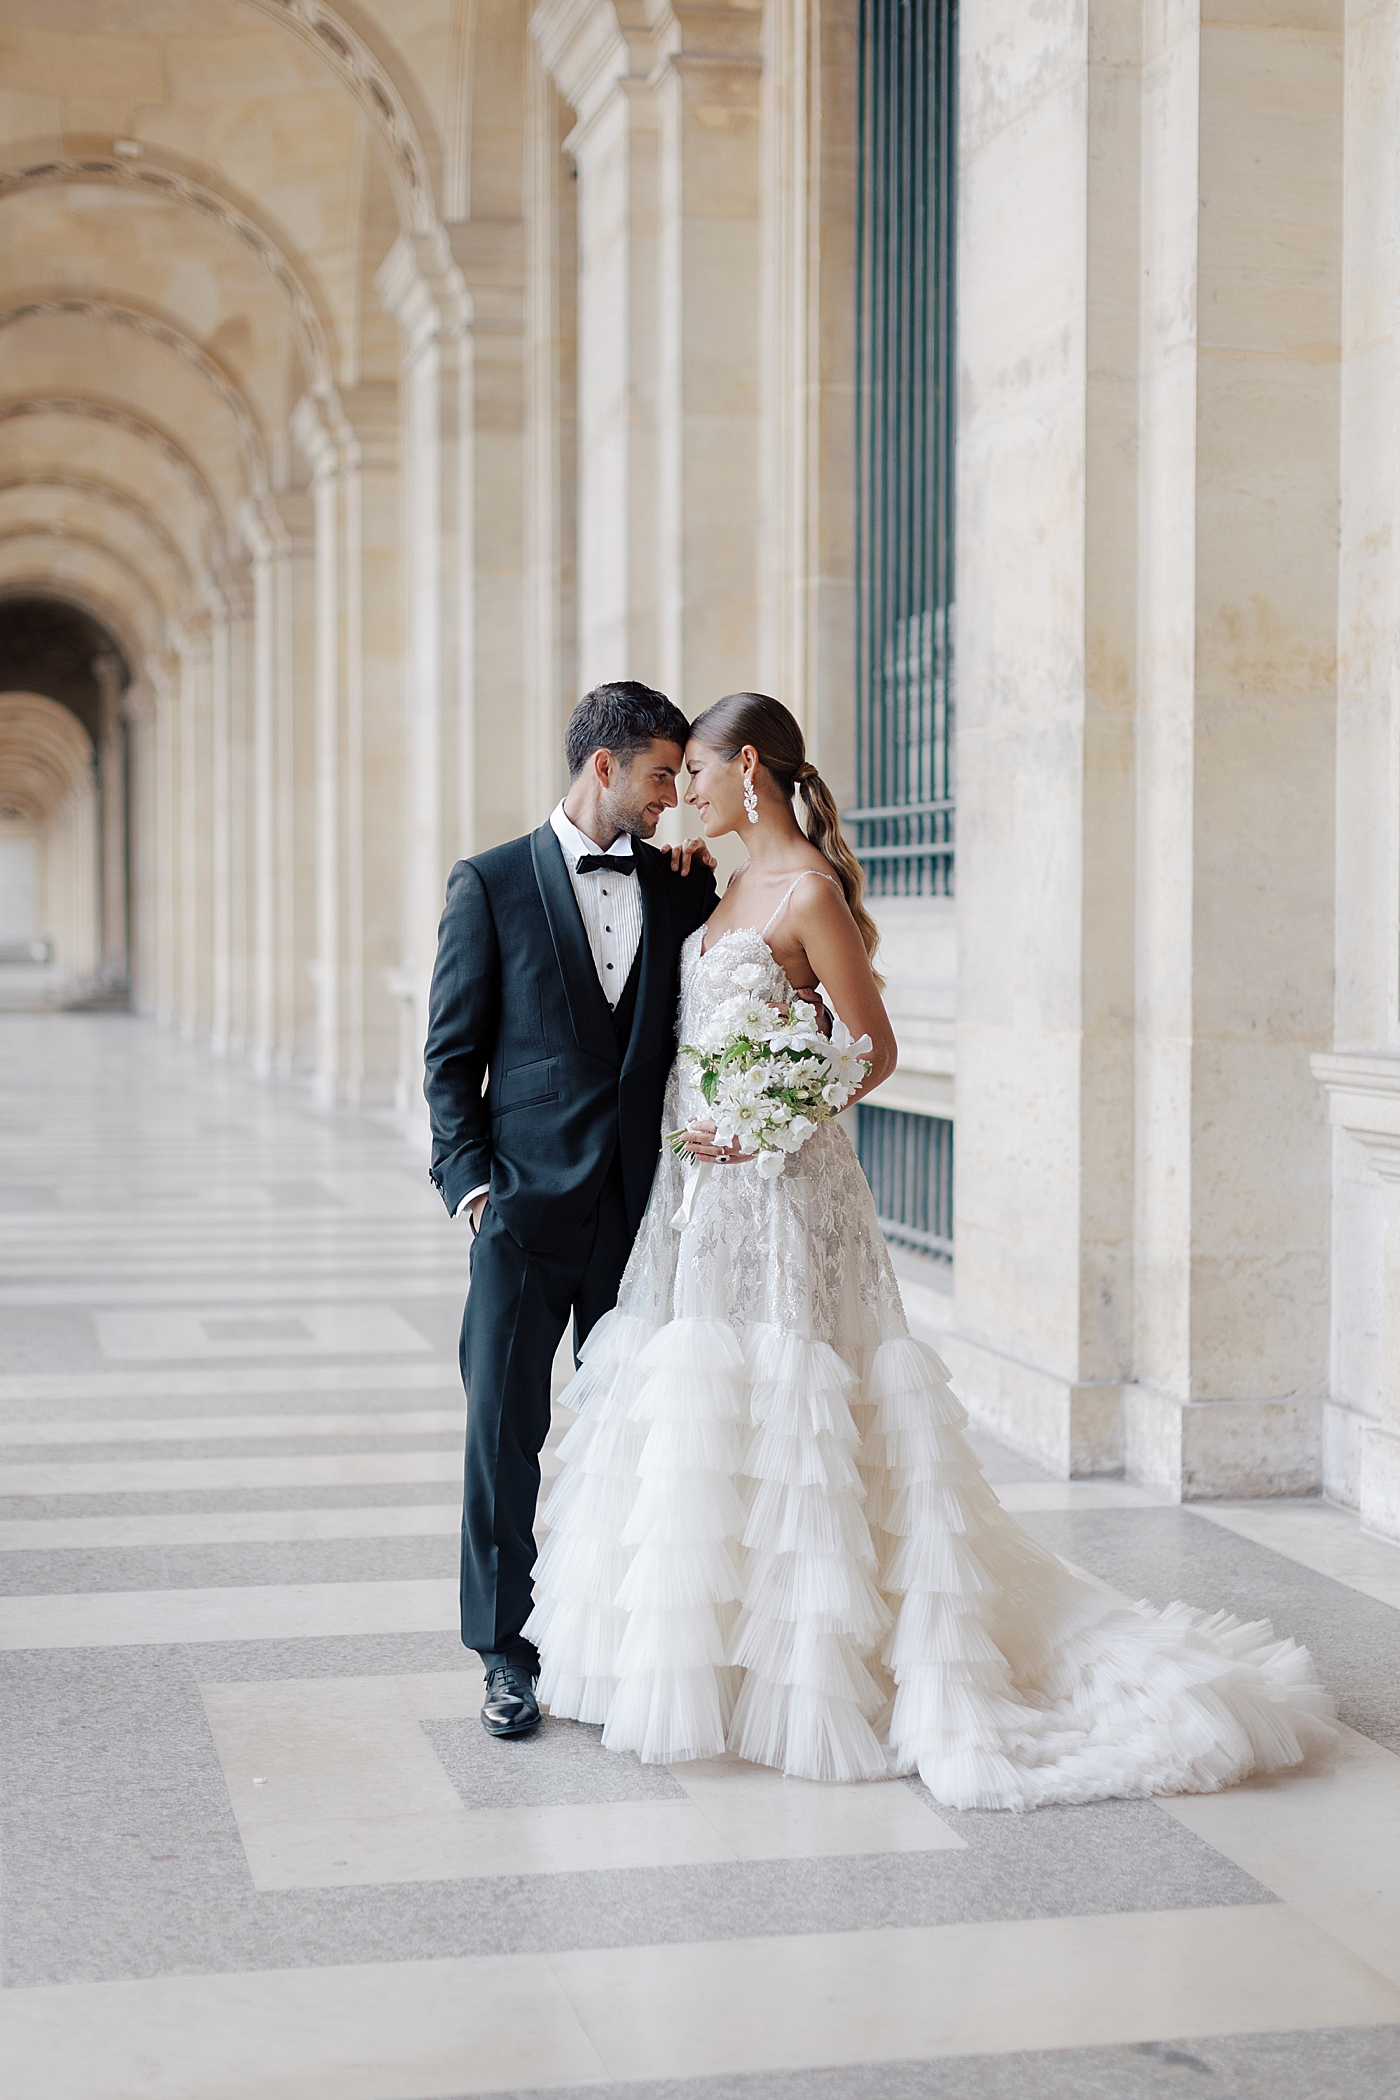 Bride and groom with their heads together standing in the outside hallway of the Louvre with a bouquet | Image by Hope Helmuth Photography